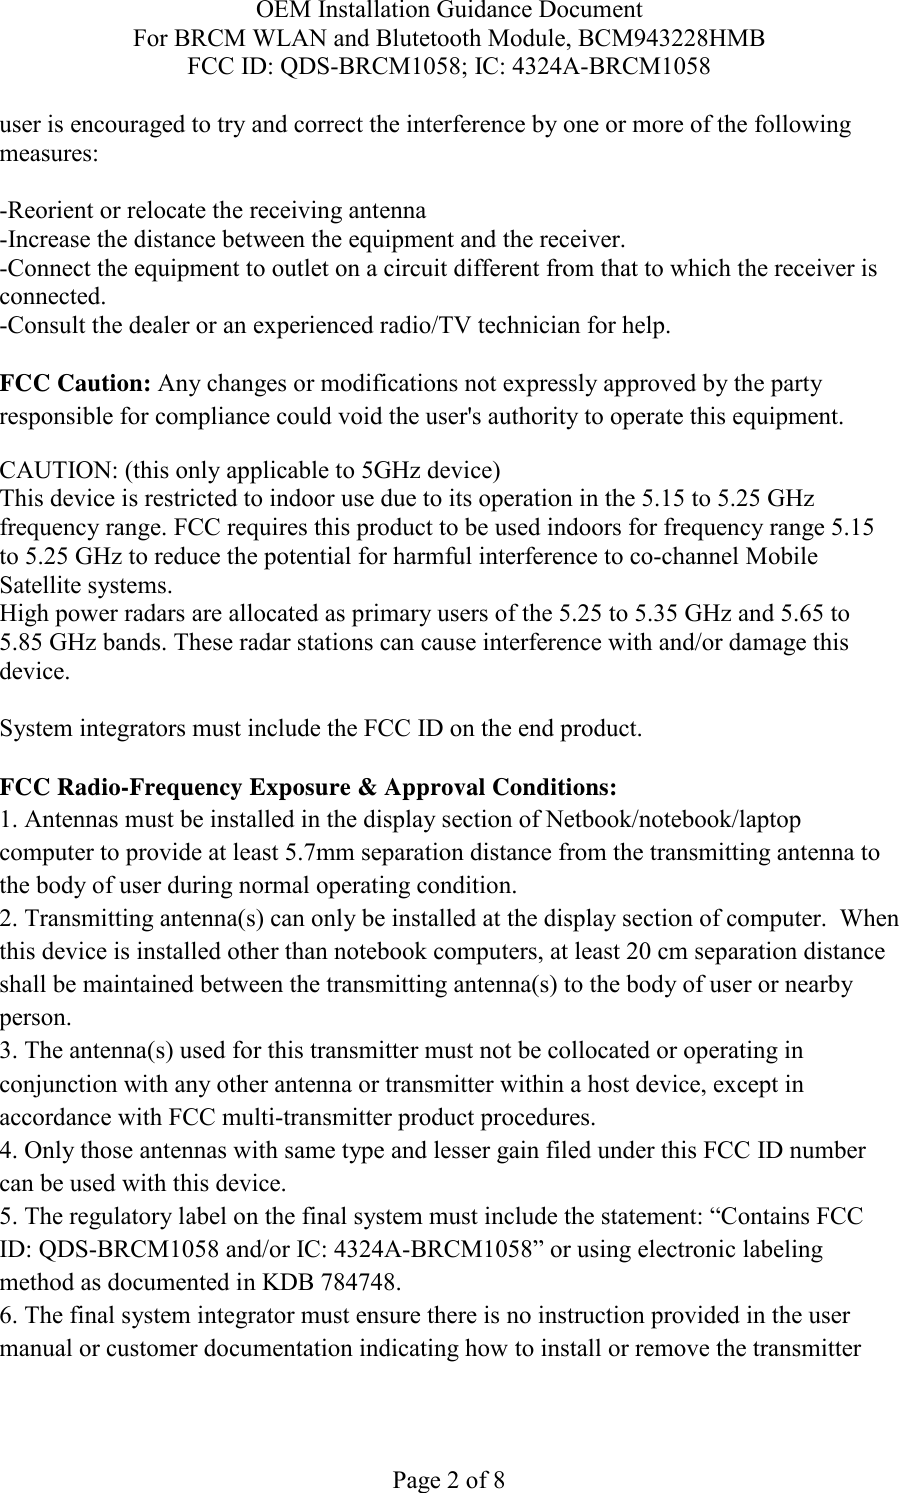 OEM Installation Guidance Document For BRCM WLAN and Blutetooth Module, BCM943228HMB FCC ID: QDS-BRCM1058; IC: 4324A-BRCM1058  Page 2 of 8 user is encouraged to try and correct the interference by one or more of the following measures:    -Reorient or relocate the receiving antenna -Increase the distance between the equipment and the receiver. -Connect the equipment to outlet on a circuit different from that to which the receiver is connected. -Consult the dealer or an experienced radio/TV technician for help.  FCC Caution: Any changes or modifications not expressly approved by the party responsible for compliance could void the user&apos;s authority to operate this equipment. CAUTION: (this only applicable to 5GHz device) This device is restricted to indoor use due to its operation in the 5.15 to 5.25 GHz frequency range. FCC requires this product to be used indoors for frequency range 5.15 to 5.25 GHz to reduce the potential for harmful interference to co-channel Mobile Satellite systems. High power radars are allocated as primary users of the 5.25 to 5.35 GHz and 5.65 to 5.85 GHz bands. These radar stations can cause interference with and/or damage this device.  System integrators must include the FCC ID on the end product.   FCC Radio-Frequency Exposure &amp; Approval Conditions: 1. Antennas must be installed in the display section of Netbook/notebook/laptop computer to provide at least 5.7mm separation distance from the transmitting antenna to the body of user during normal operating condition. 2. Transmitting antenna(s) can only be installed at the display section of computer.  When this device is installed other than notebook computers, at least 20 cm separation distance shall be maintained between the transmitting antenna(s) to the body of user or nearby person. 3. The antenna(s) used for this transmitter must not be collocated or operating in conjunction with any other antenna or transmitter within a host device, except in accordance with FCC multi-transmitter product procedures. 4. Only those antennas with same type and lesser gain filed under this FCC ID number can be used with this device. 5. The regulatory label on the final system must include the statement: “Contains FCC ID: QDS-BRCM1058 and/or IC: 4324A-BRCM1058” or using electronic labeling method as documented in KDB 784748. 6. The final system integrator must ensure there is no instruction provided in the user manual or customer documentation indicating how to install or remove the transmitter 